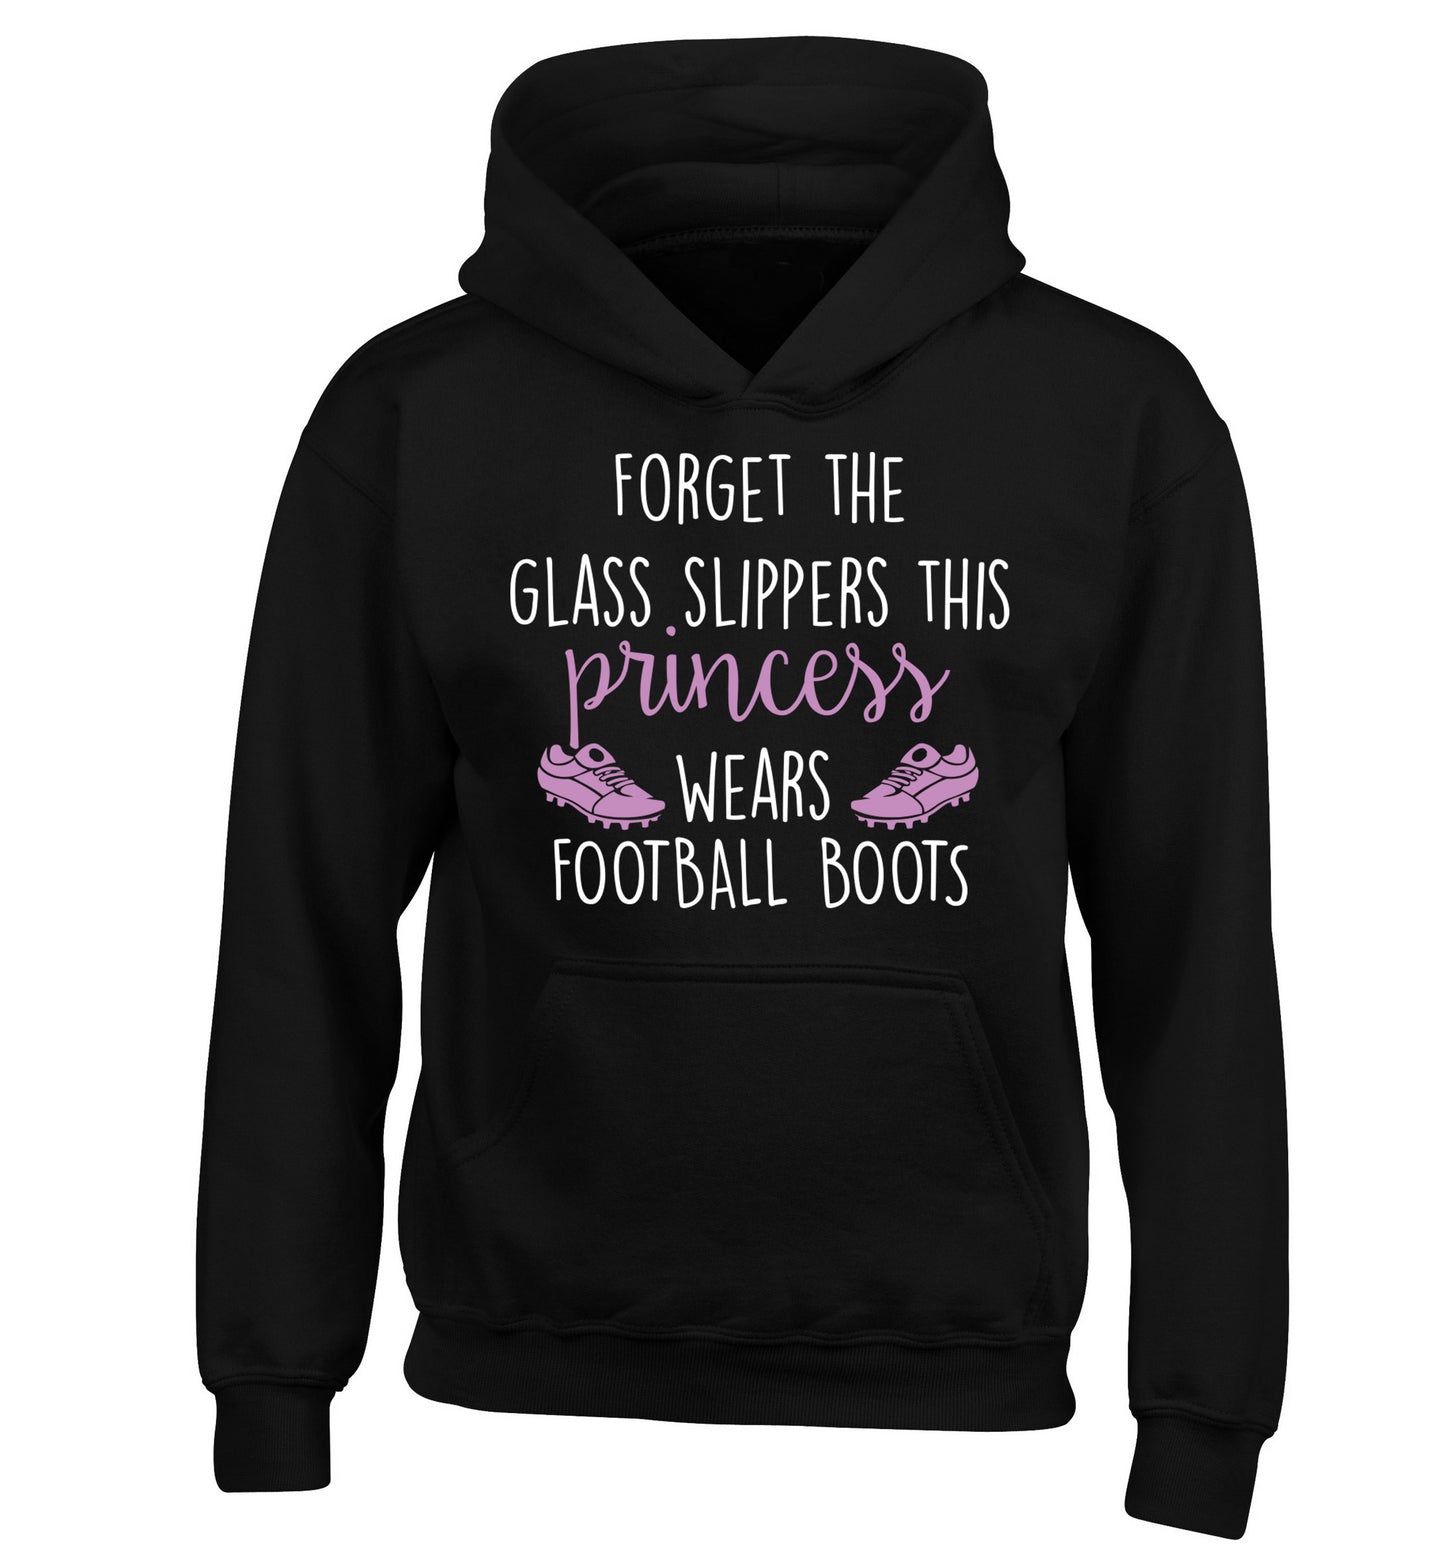 Forget the glass slippers this princess wears football boots children's black hoodie 12-14 Years